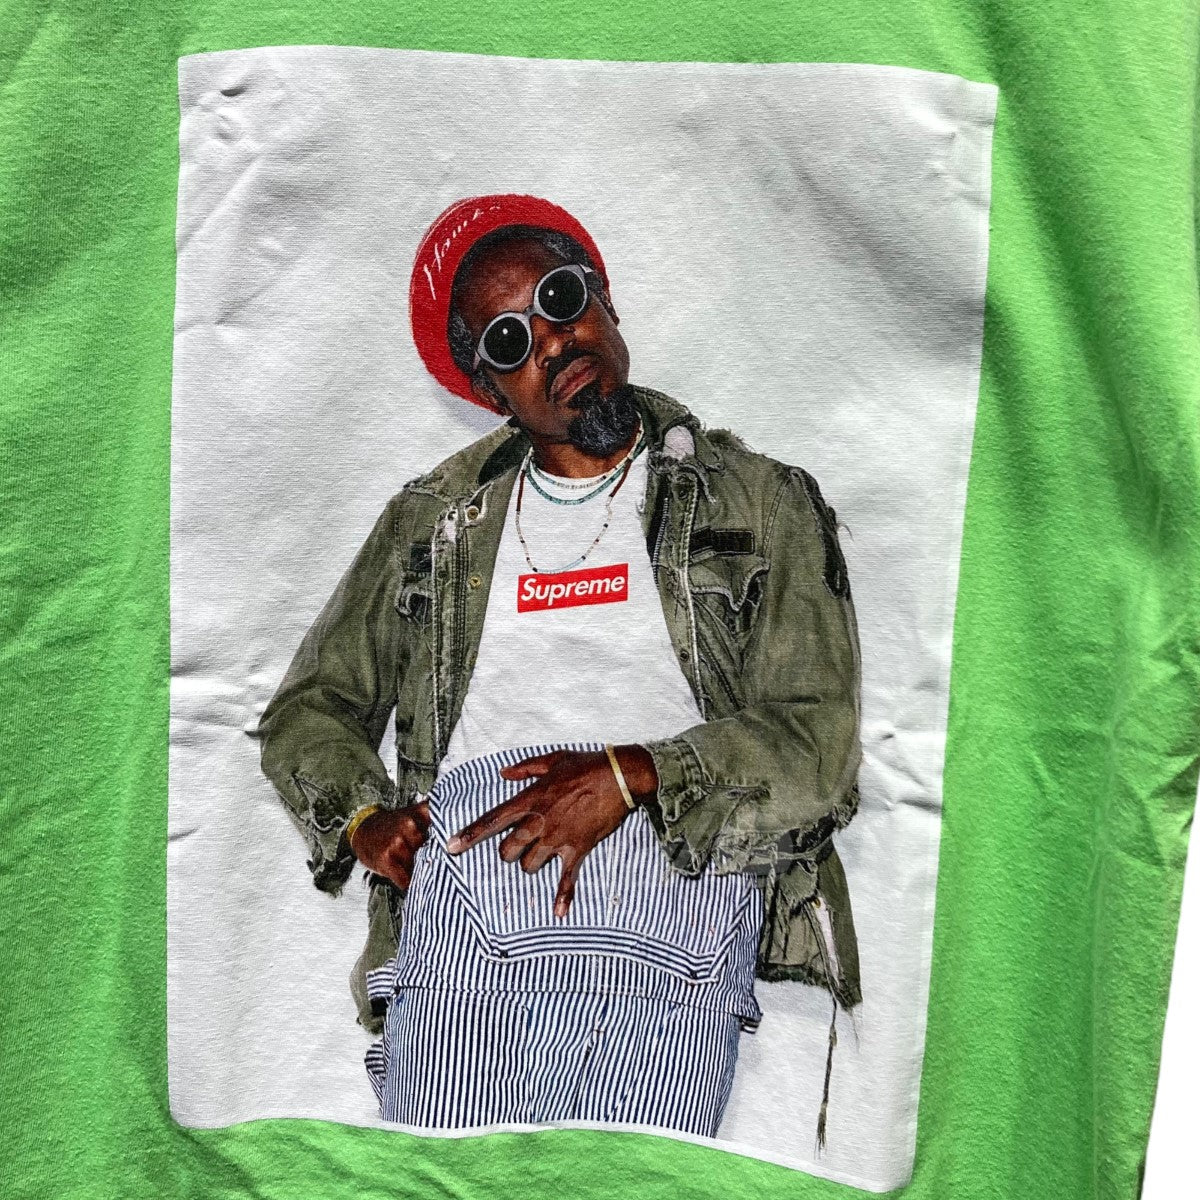 SUPREME(シュプリーム) 22AW　Andre 3000 Tee　Tシャツ